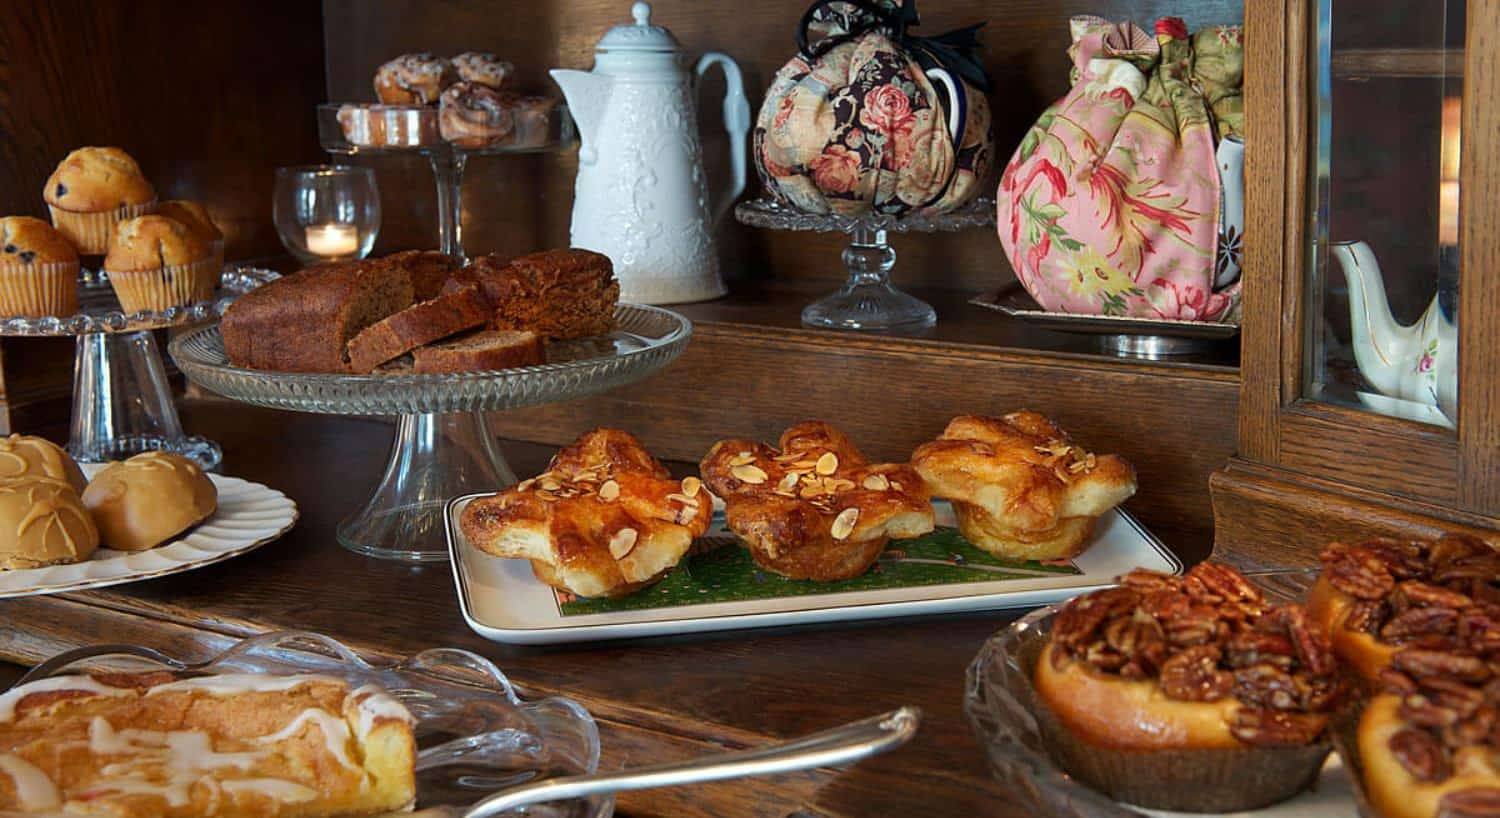 Large assortment of breakfast pastries on glass and porcelain serving dishes on wooden cabinet